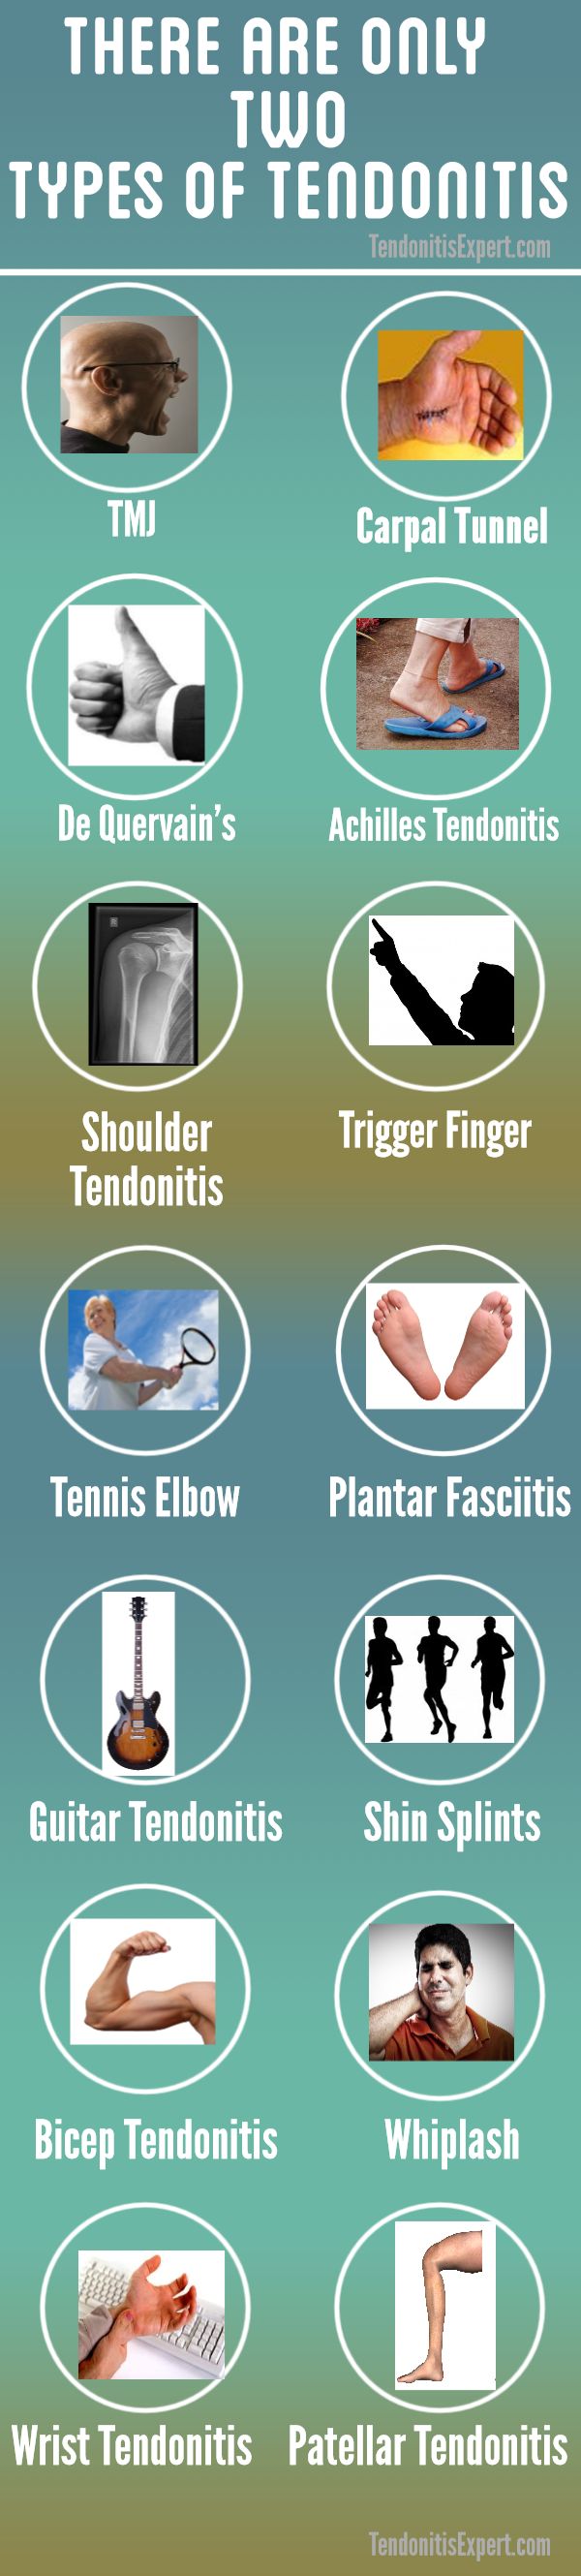 tendonitis types infographic